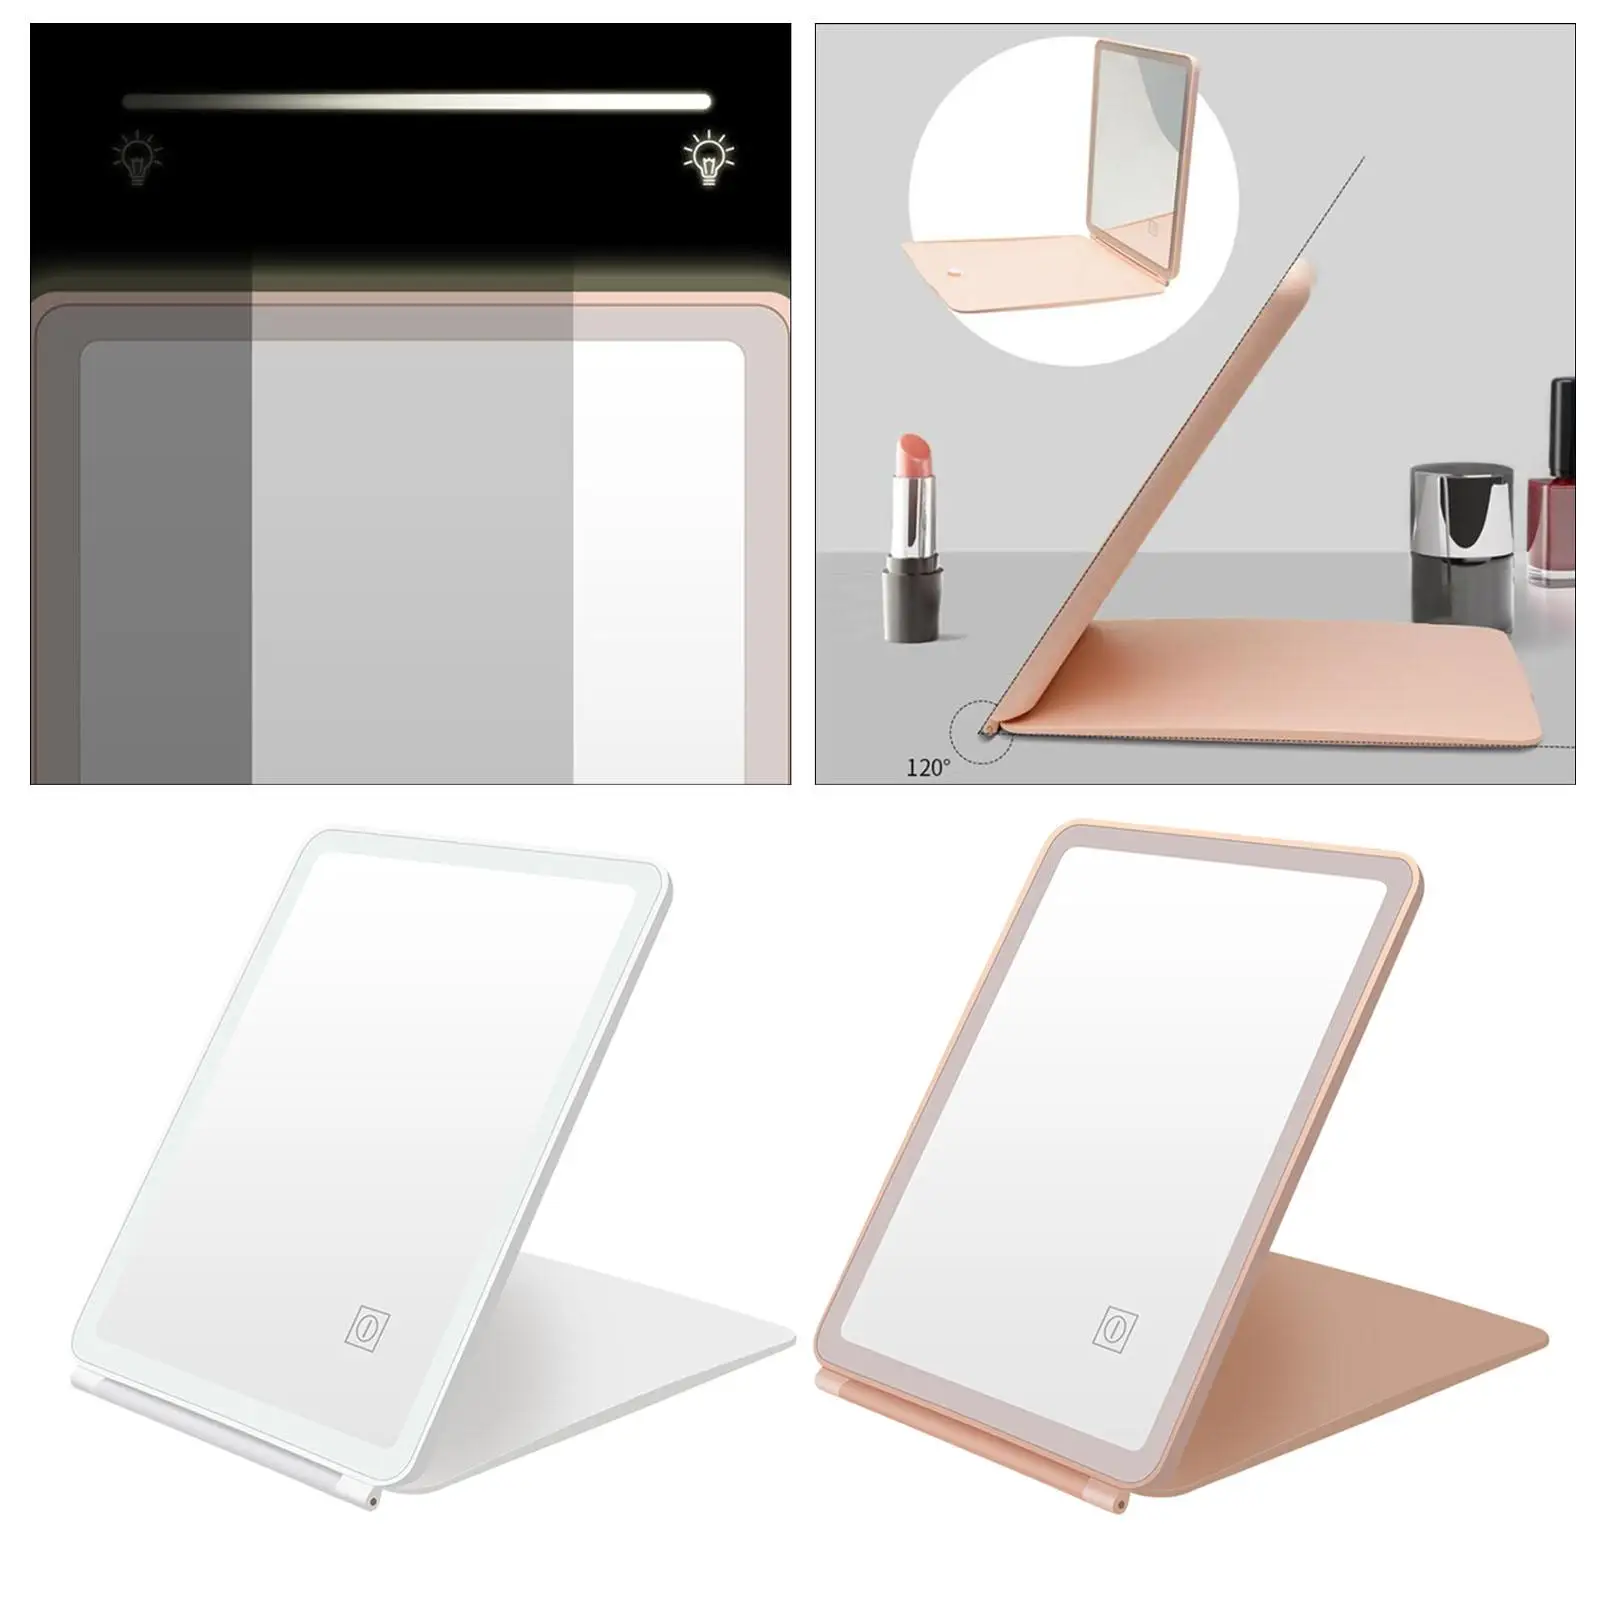 LED Makeup Mirror Touch Screen Dimming for Home Beauty Gift 